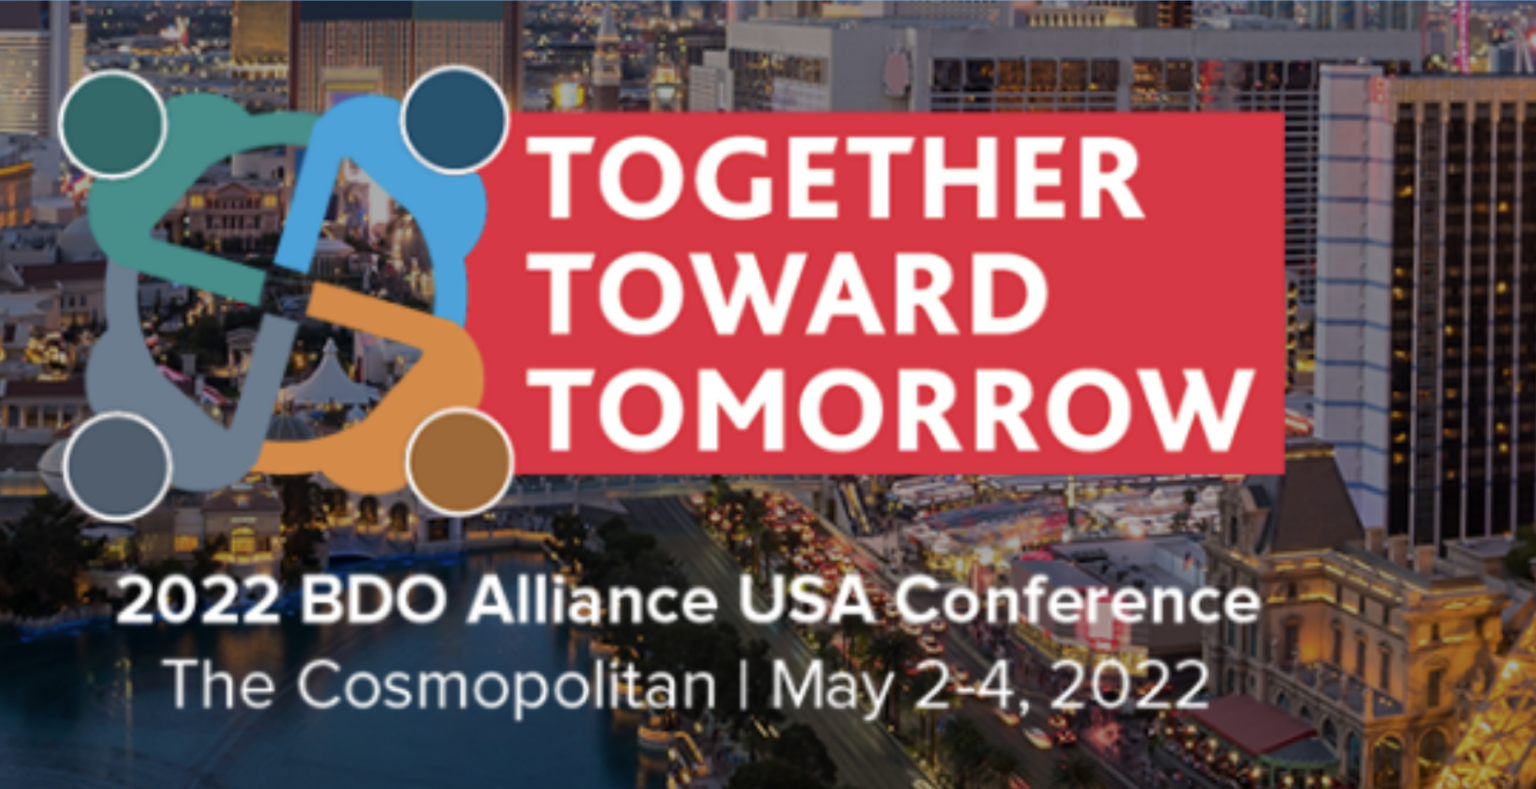 Ready for Vegas? A Helpful Guide for the 2022 BDO Alliance Conference